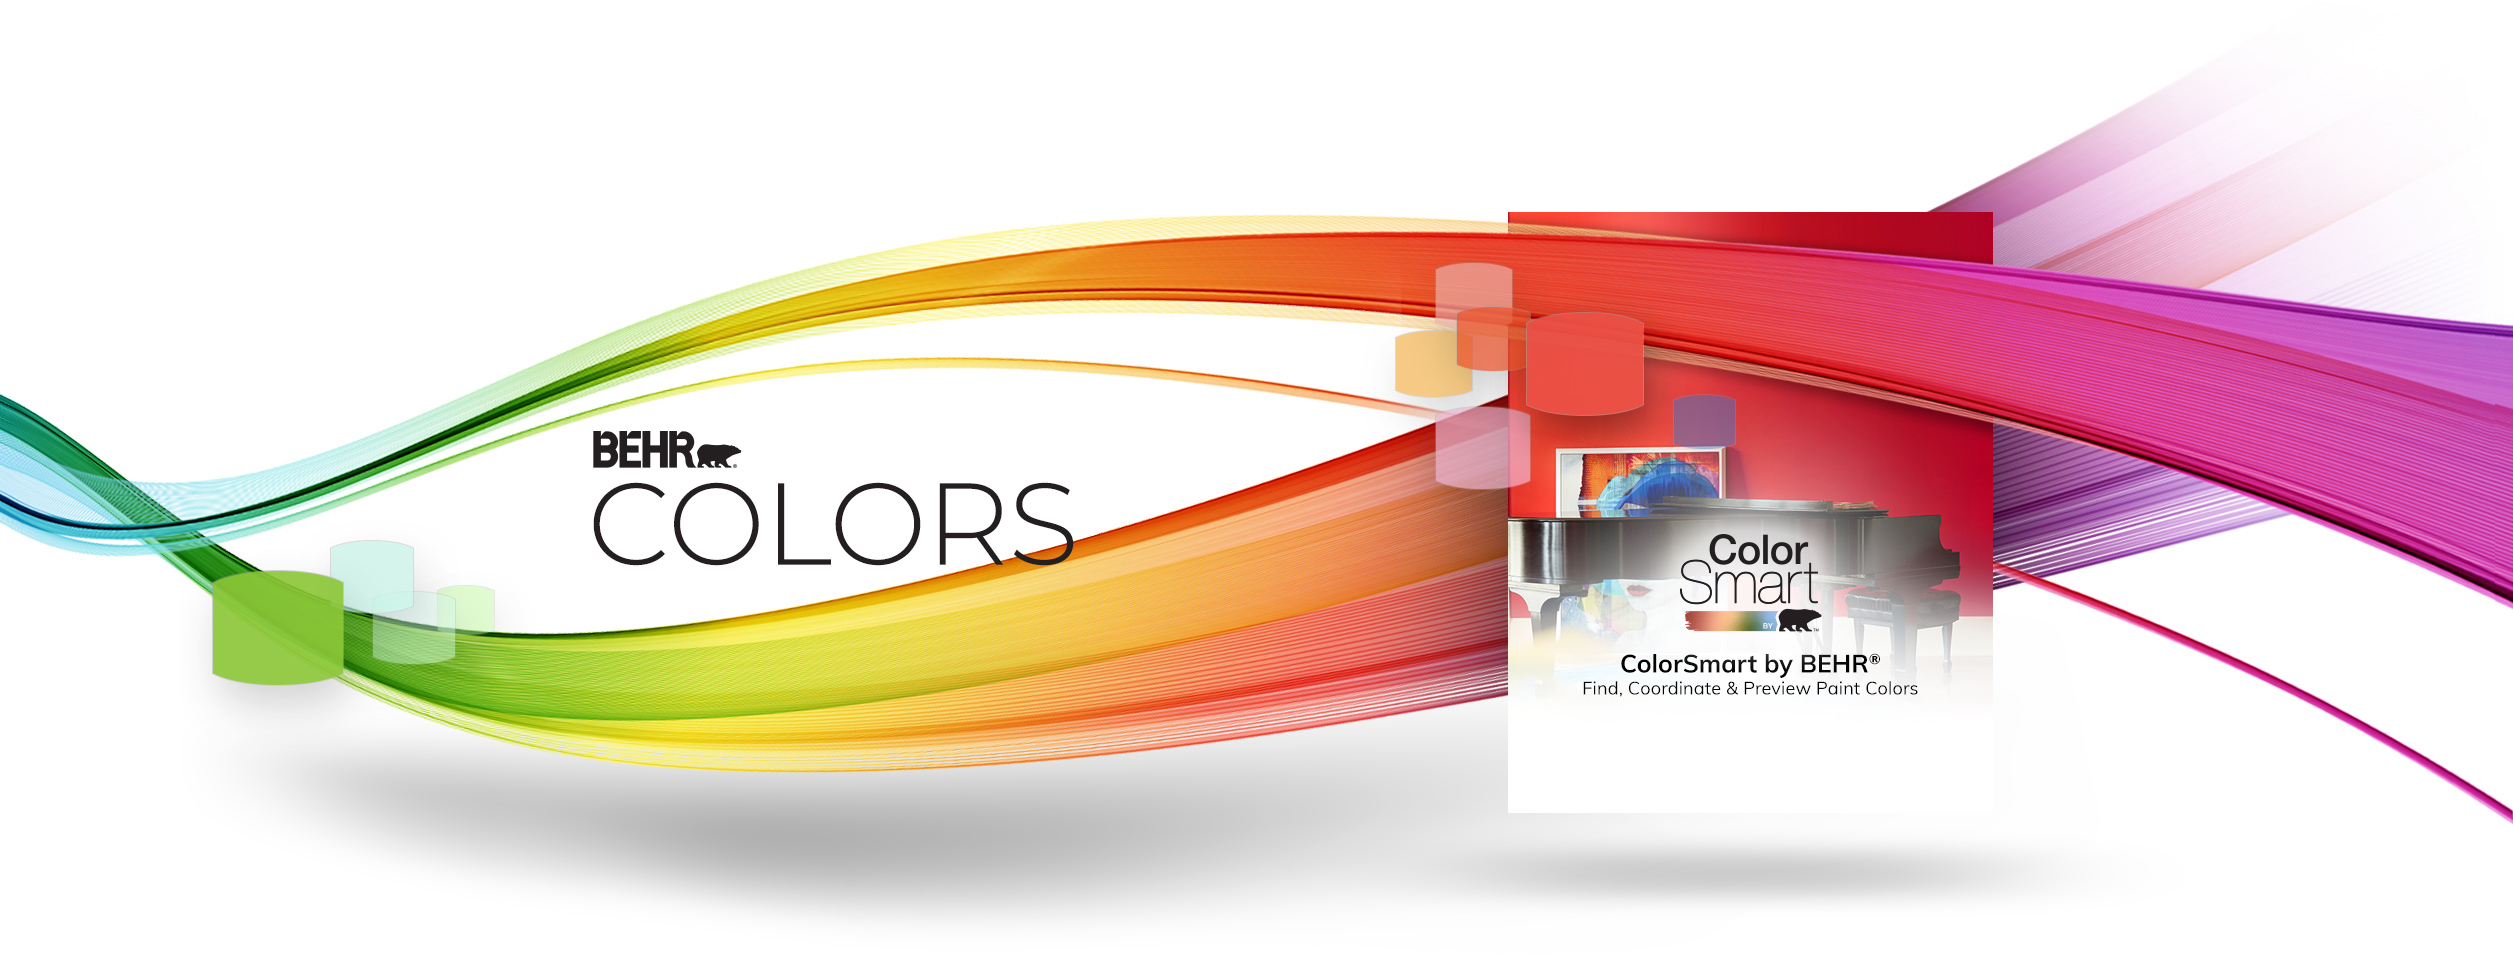 Creative image of ribbons of color sweeping across the page, winding around ColorSmart logo.